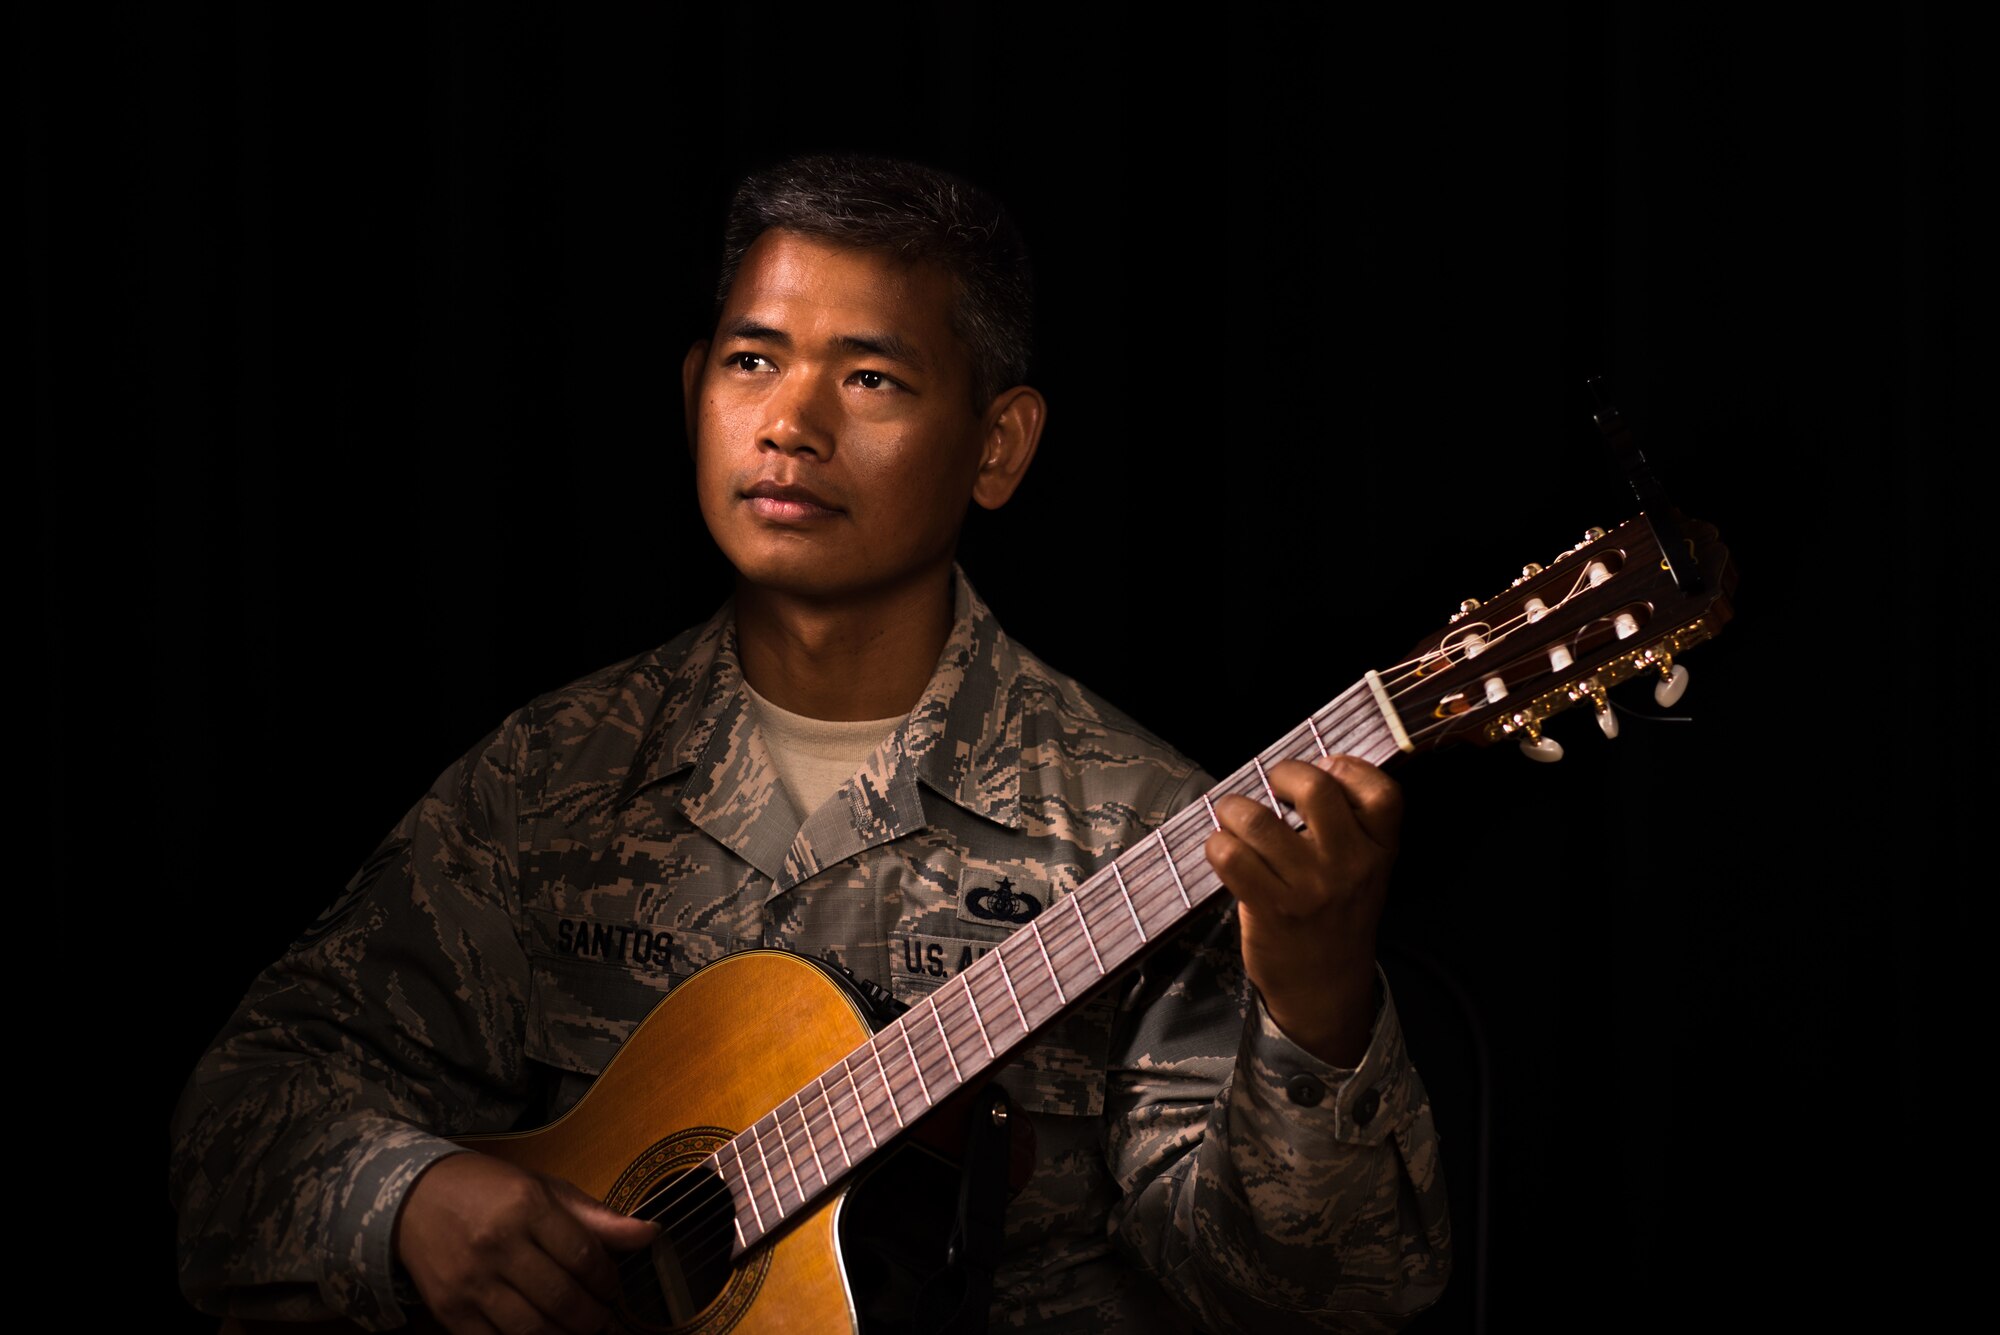 U.S. Air Force Tech. Sgt. Daniel Santos, U.S. Air Force Heritage Band of America guitarist, poses for a photo at Joint Base Langley-Eustis, Virginia, Aug. 1, 2018.